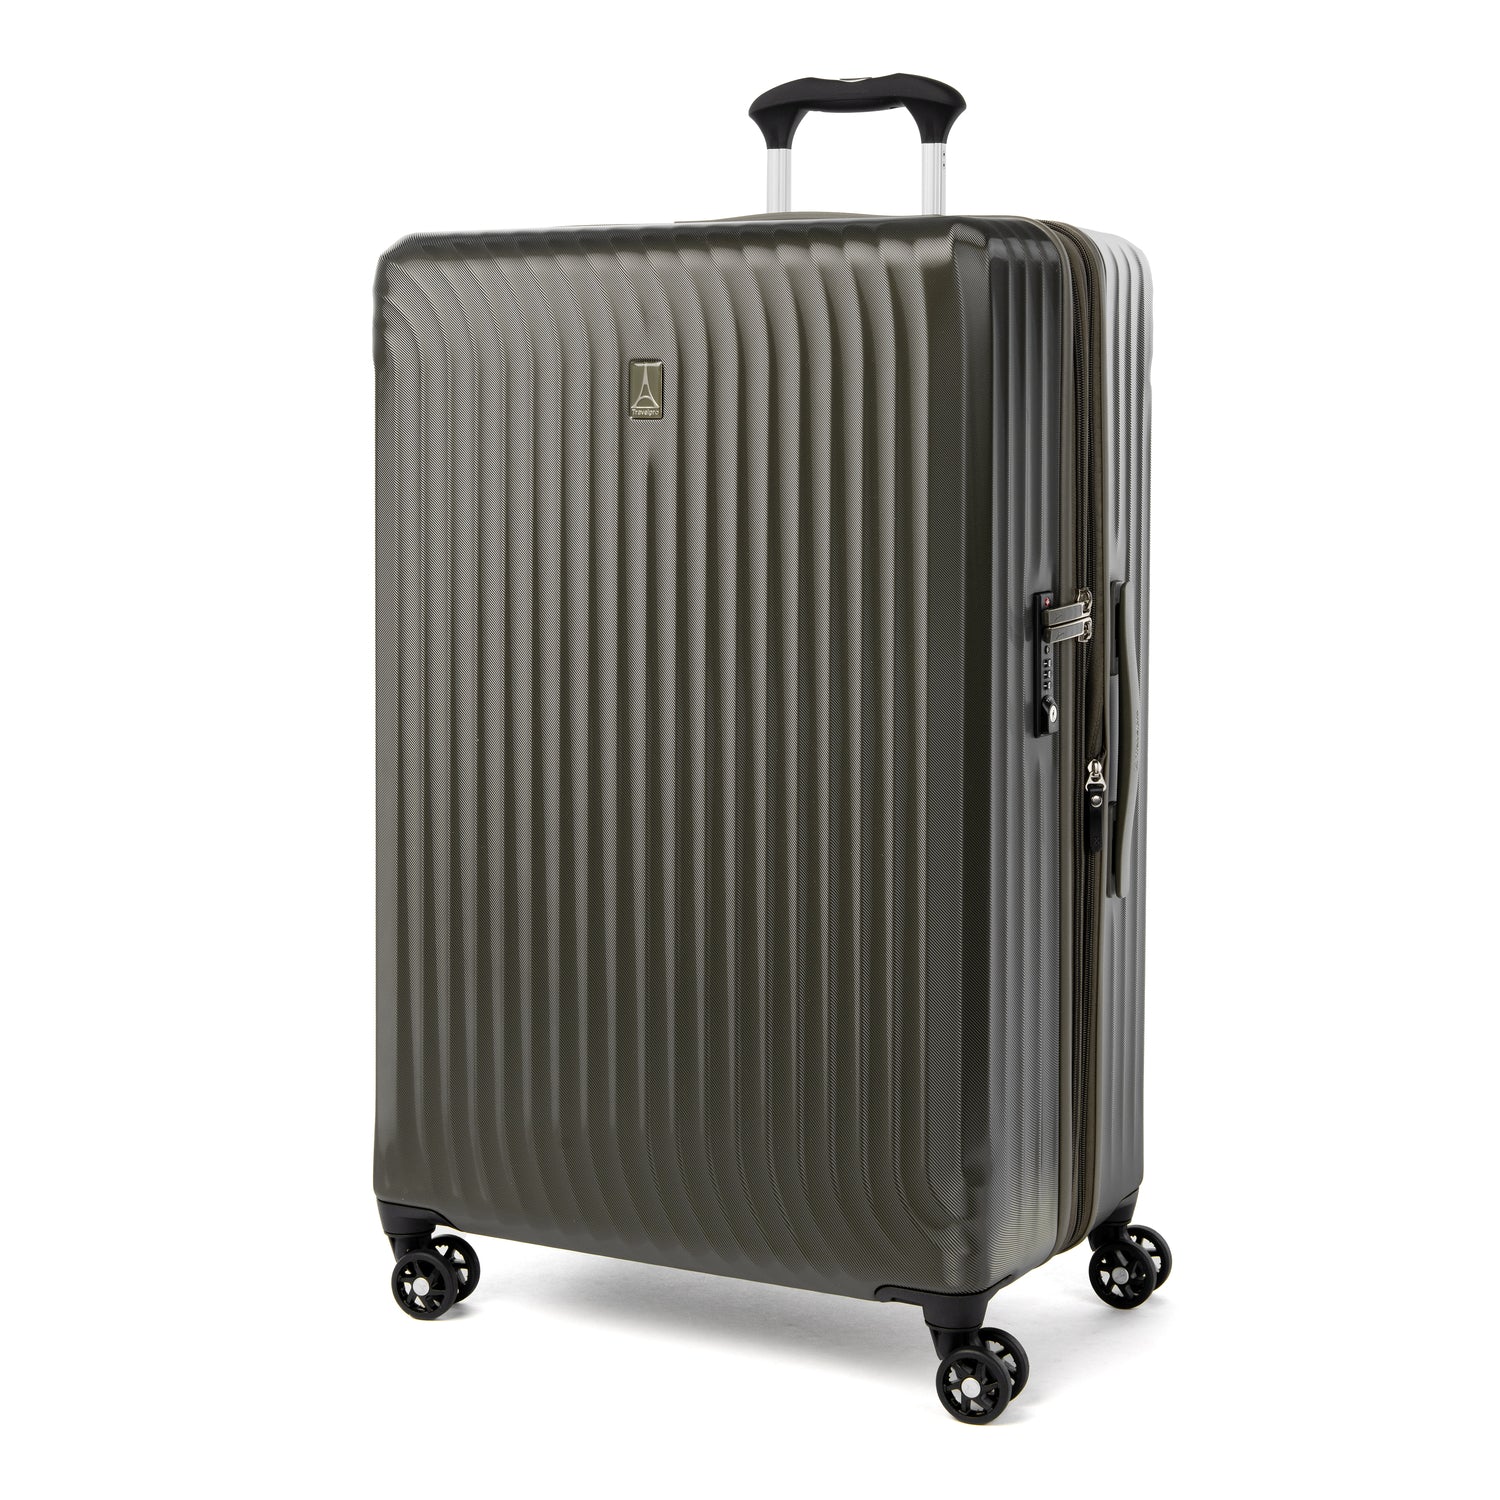 Travelpro Maxlite Air Large Check-in Expandable Hardside Spinner Luggage